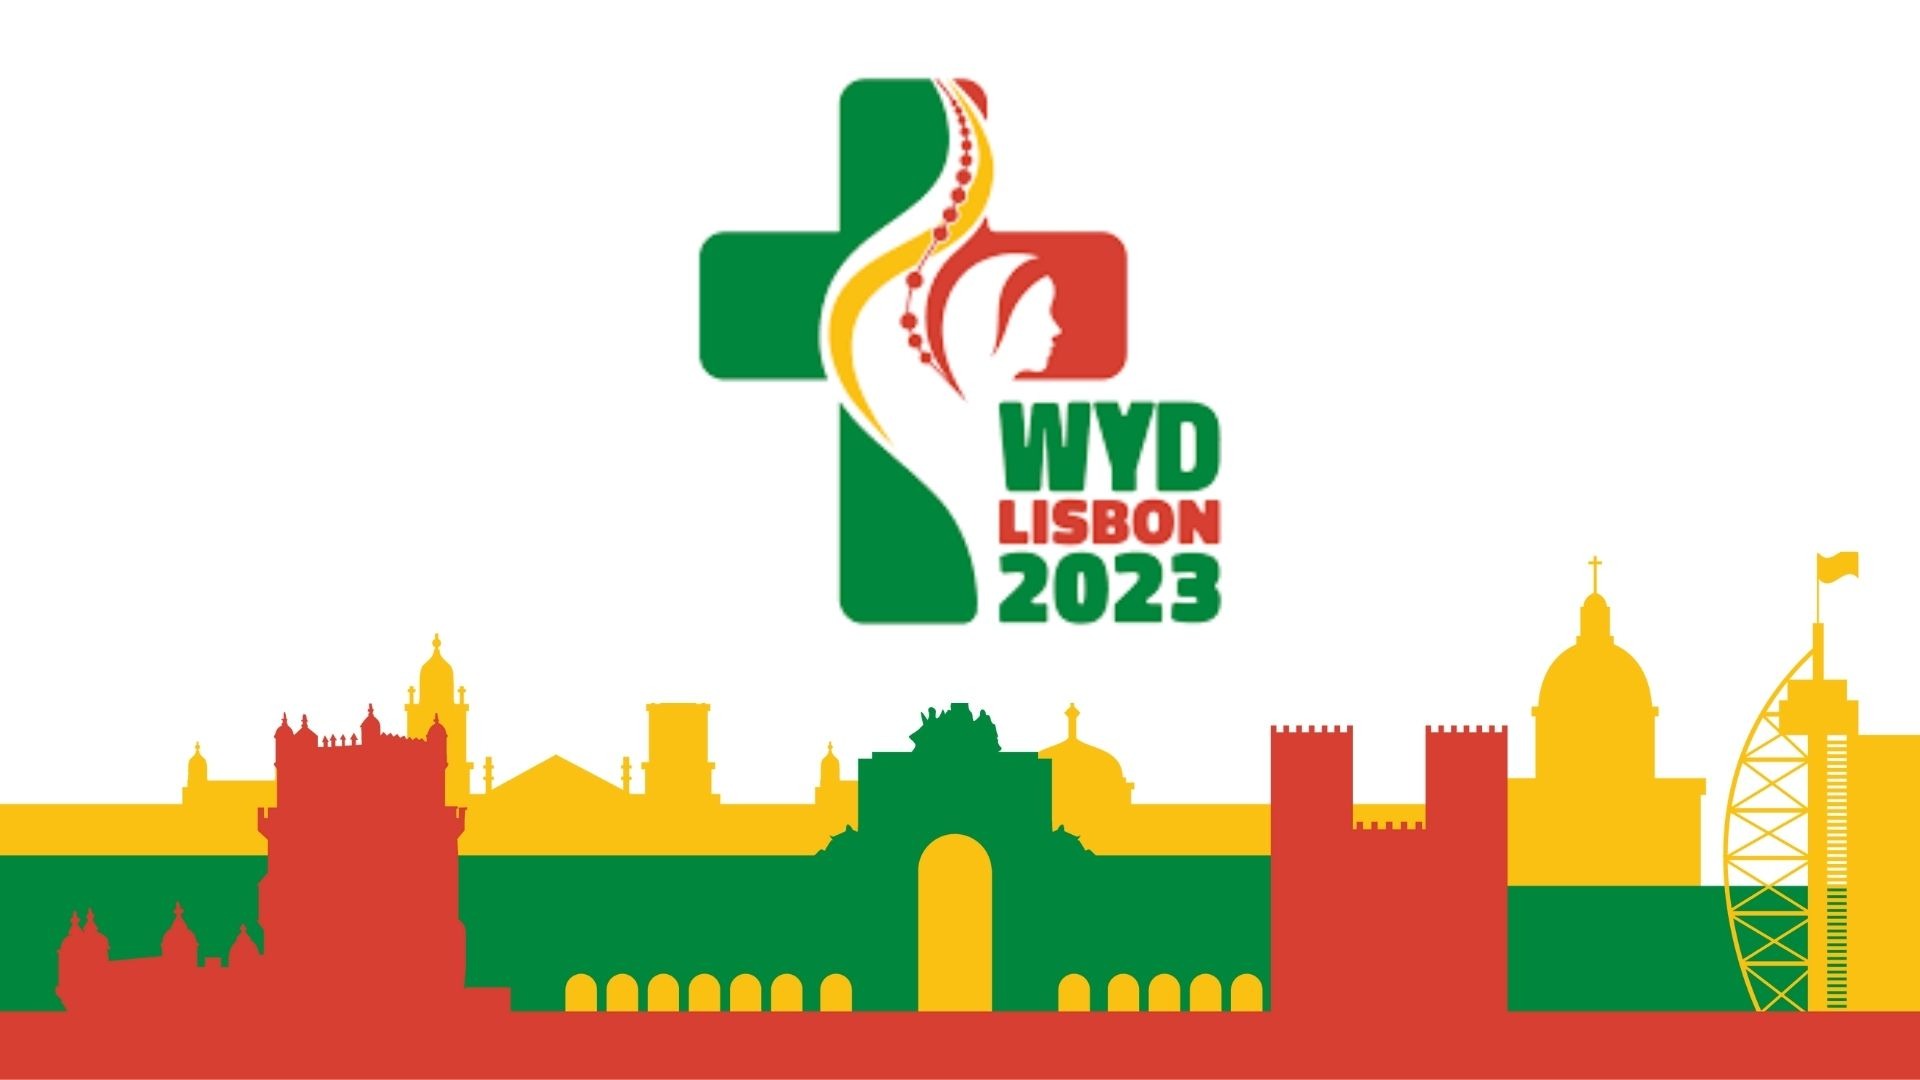 World Youth Day Lisbon 2023 - Outline of building in red, green, yellow with Logo above the outline of city